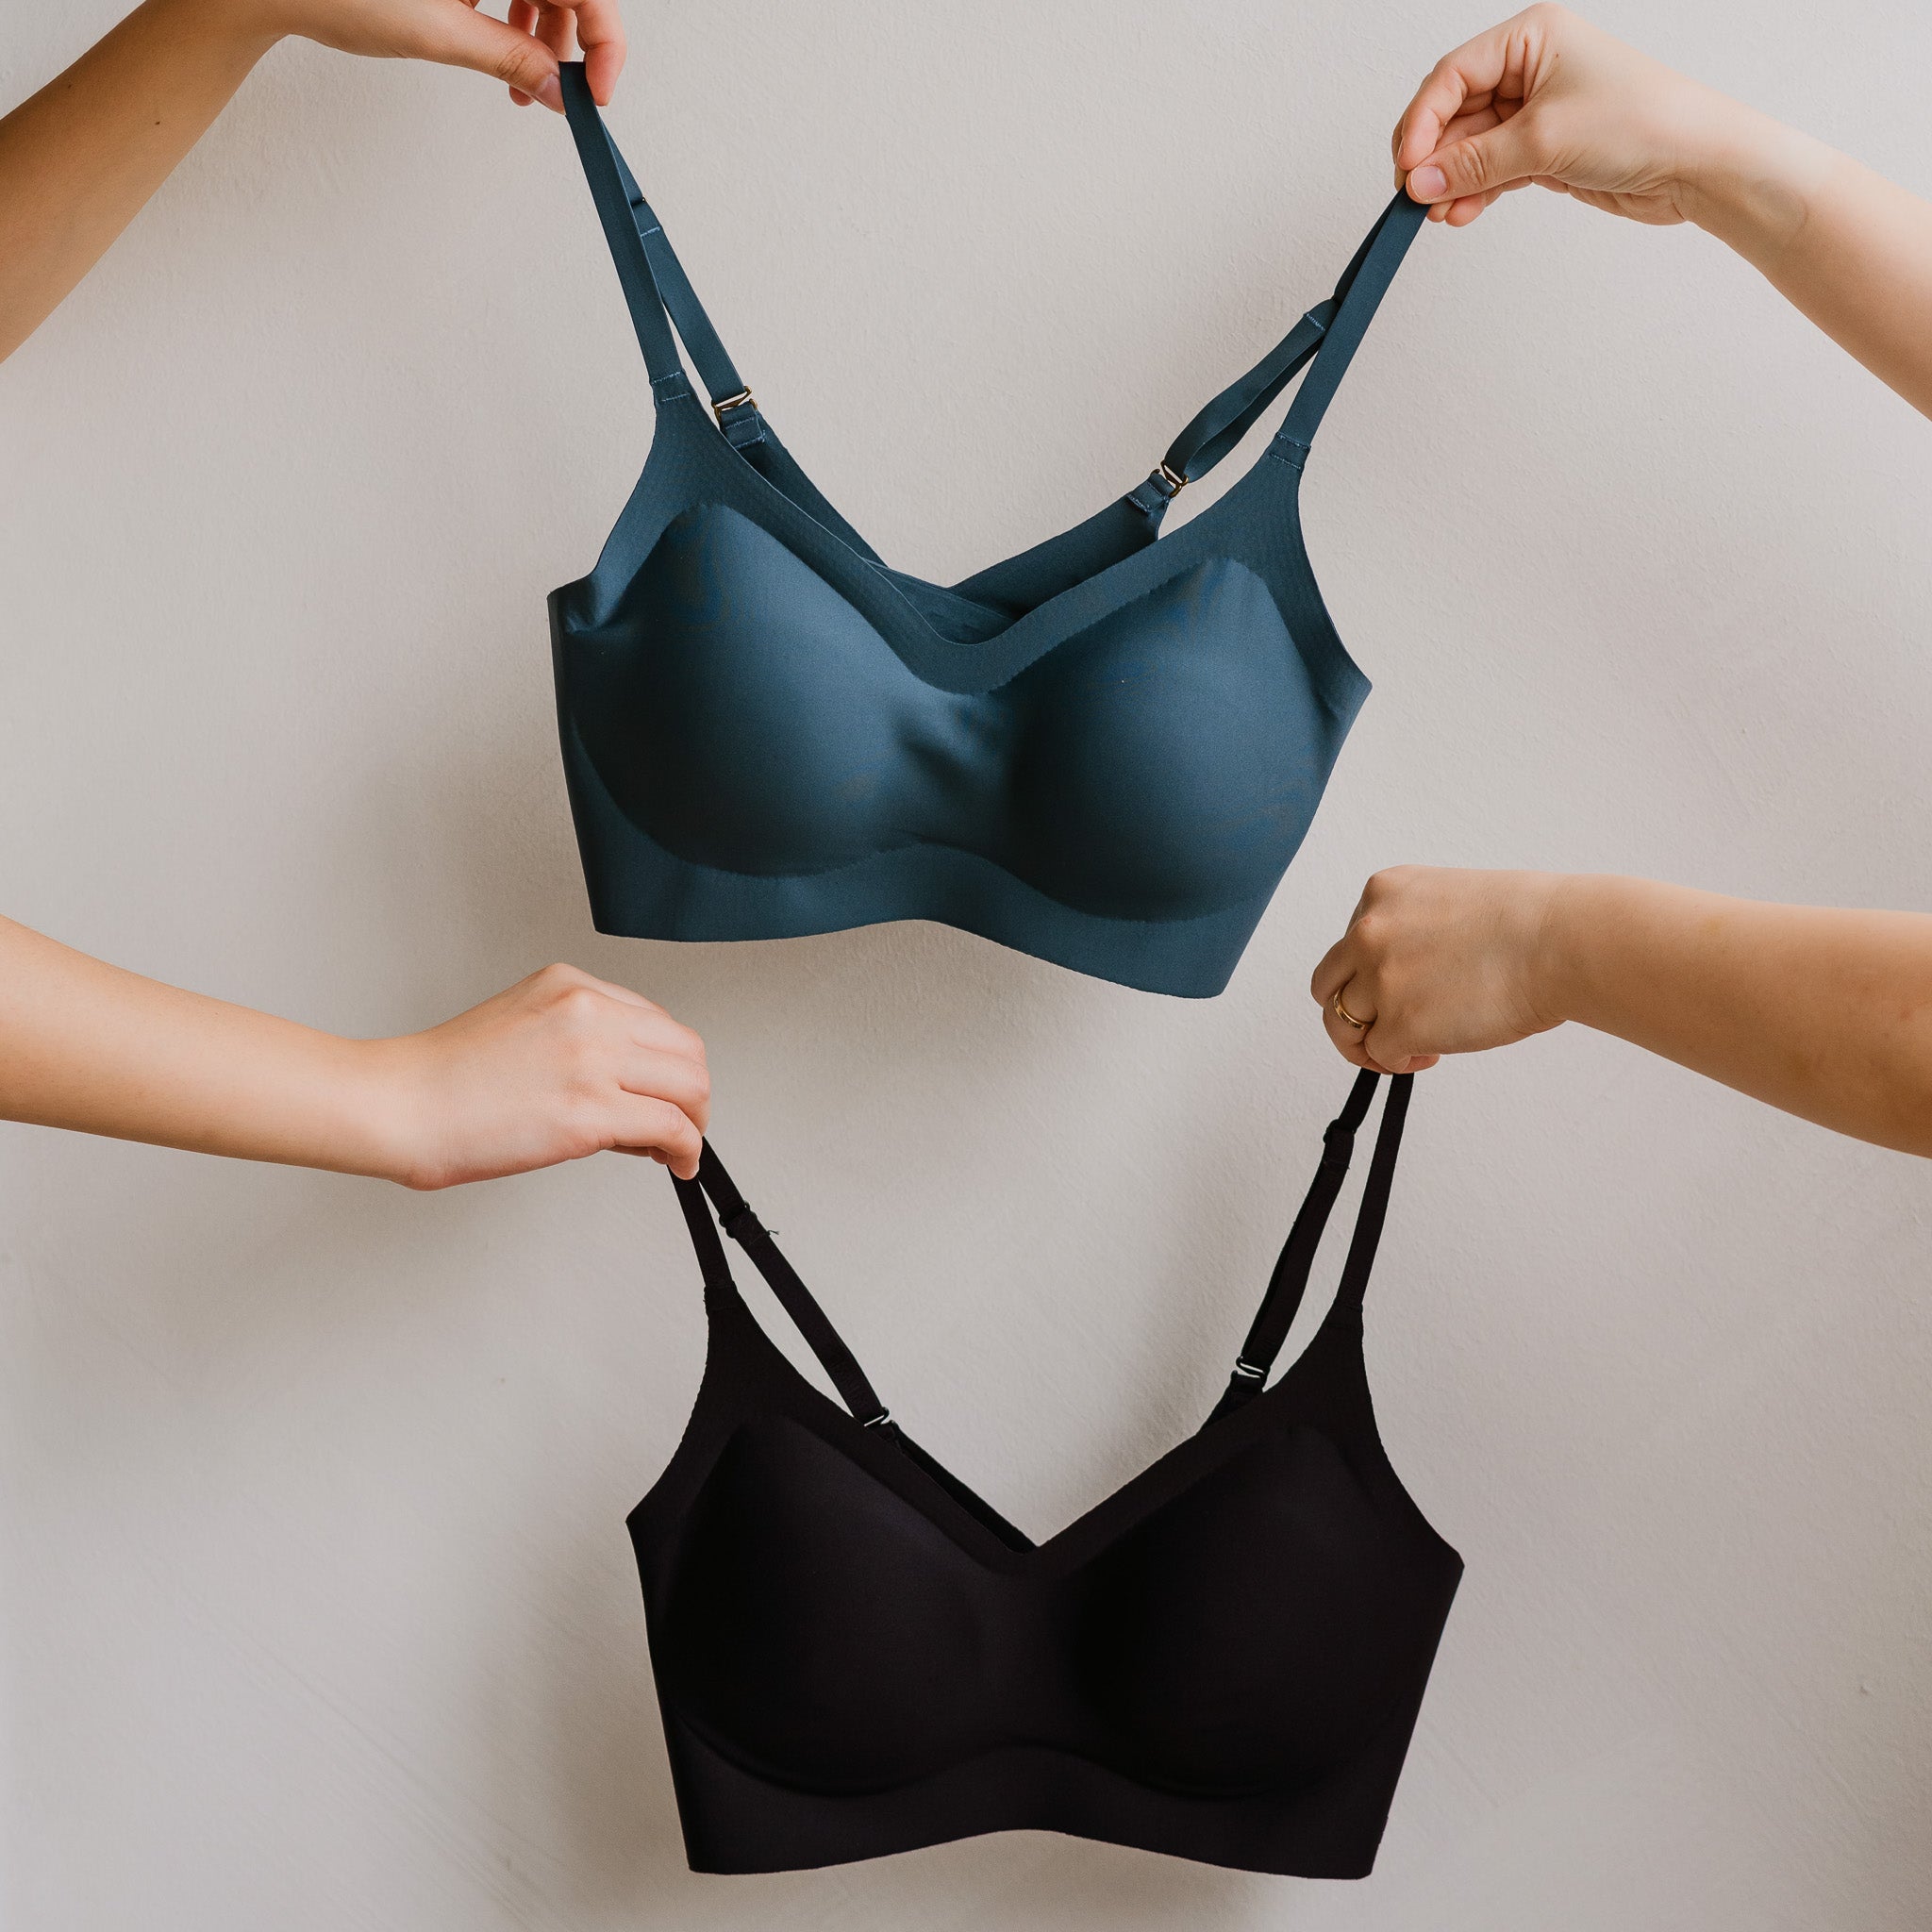 Air-ee Seamless Bra in Lush Teal (Limited Edition) - Thin Straps (Sign